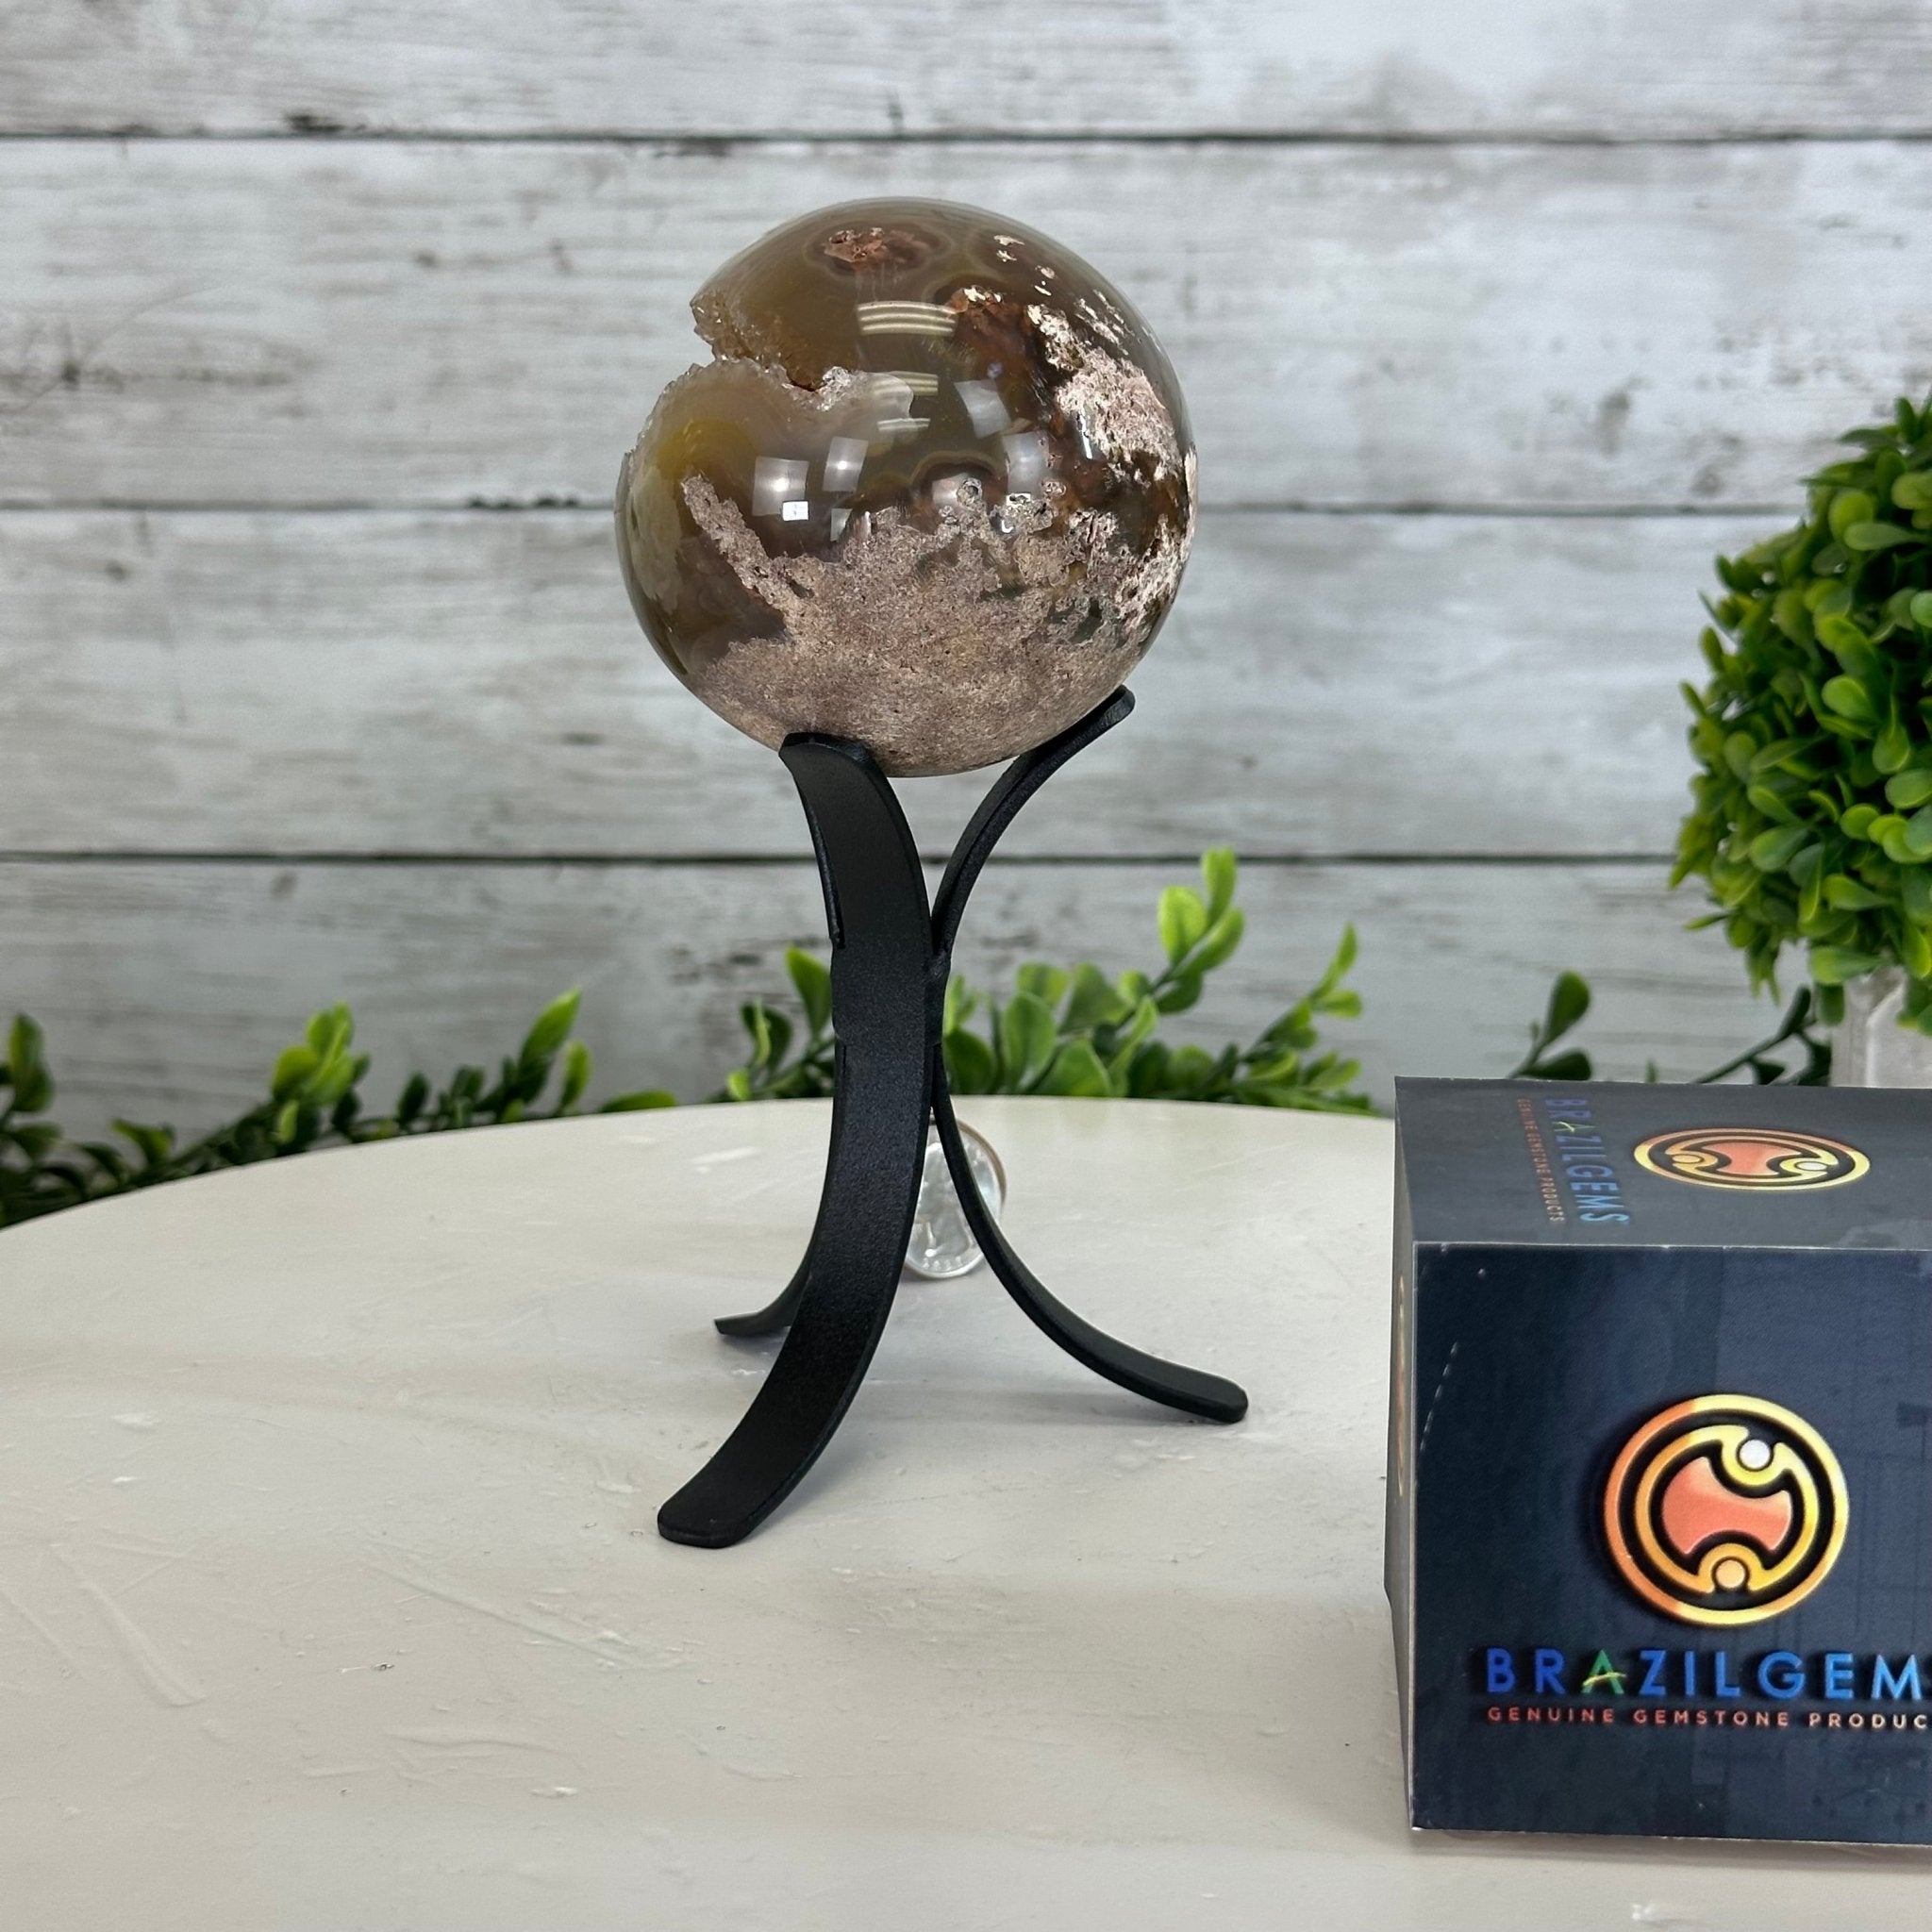 Druzy Agate Sphere on a Metal Stand, 1.2 lbs & 6.6" Tall #5634-0005 - Brazil GemsBrazil GemsDruzy Agate Sphere on a Metal Stand, 1.2 lbs & 6.6" Tall #5634-0005Spheres5634-0005